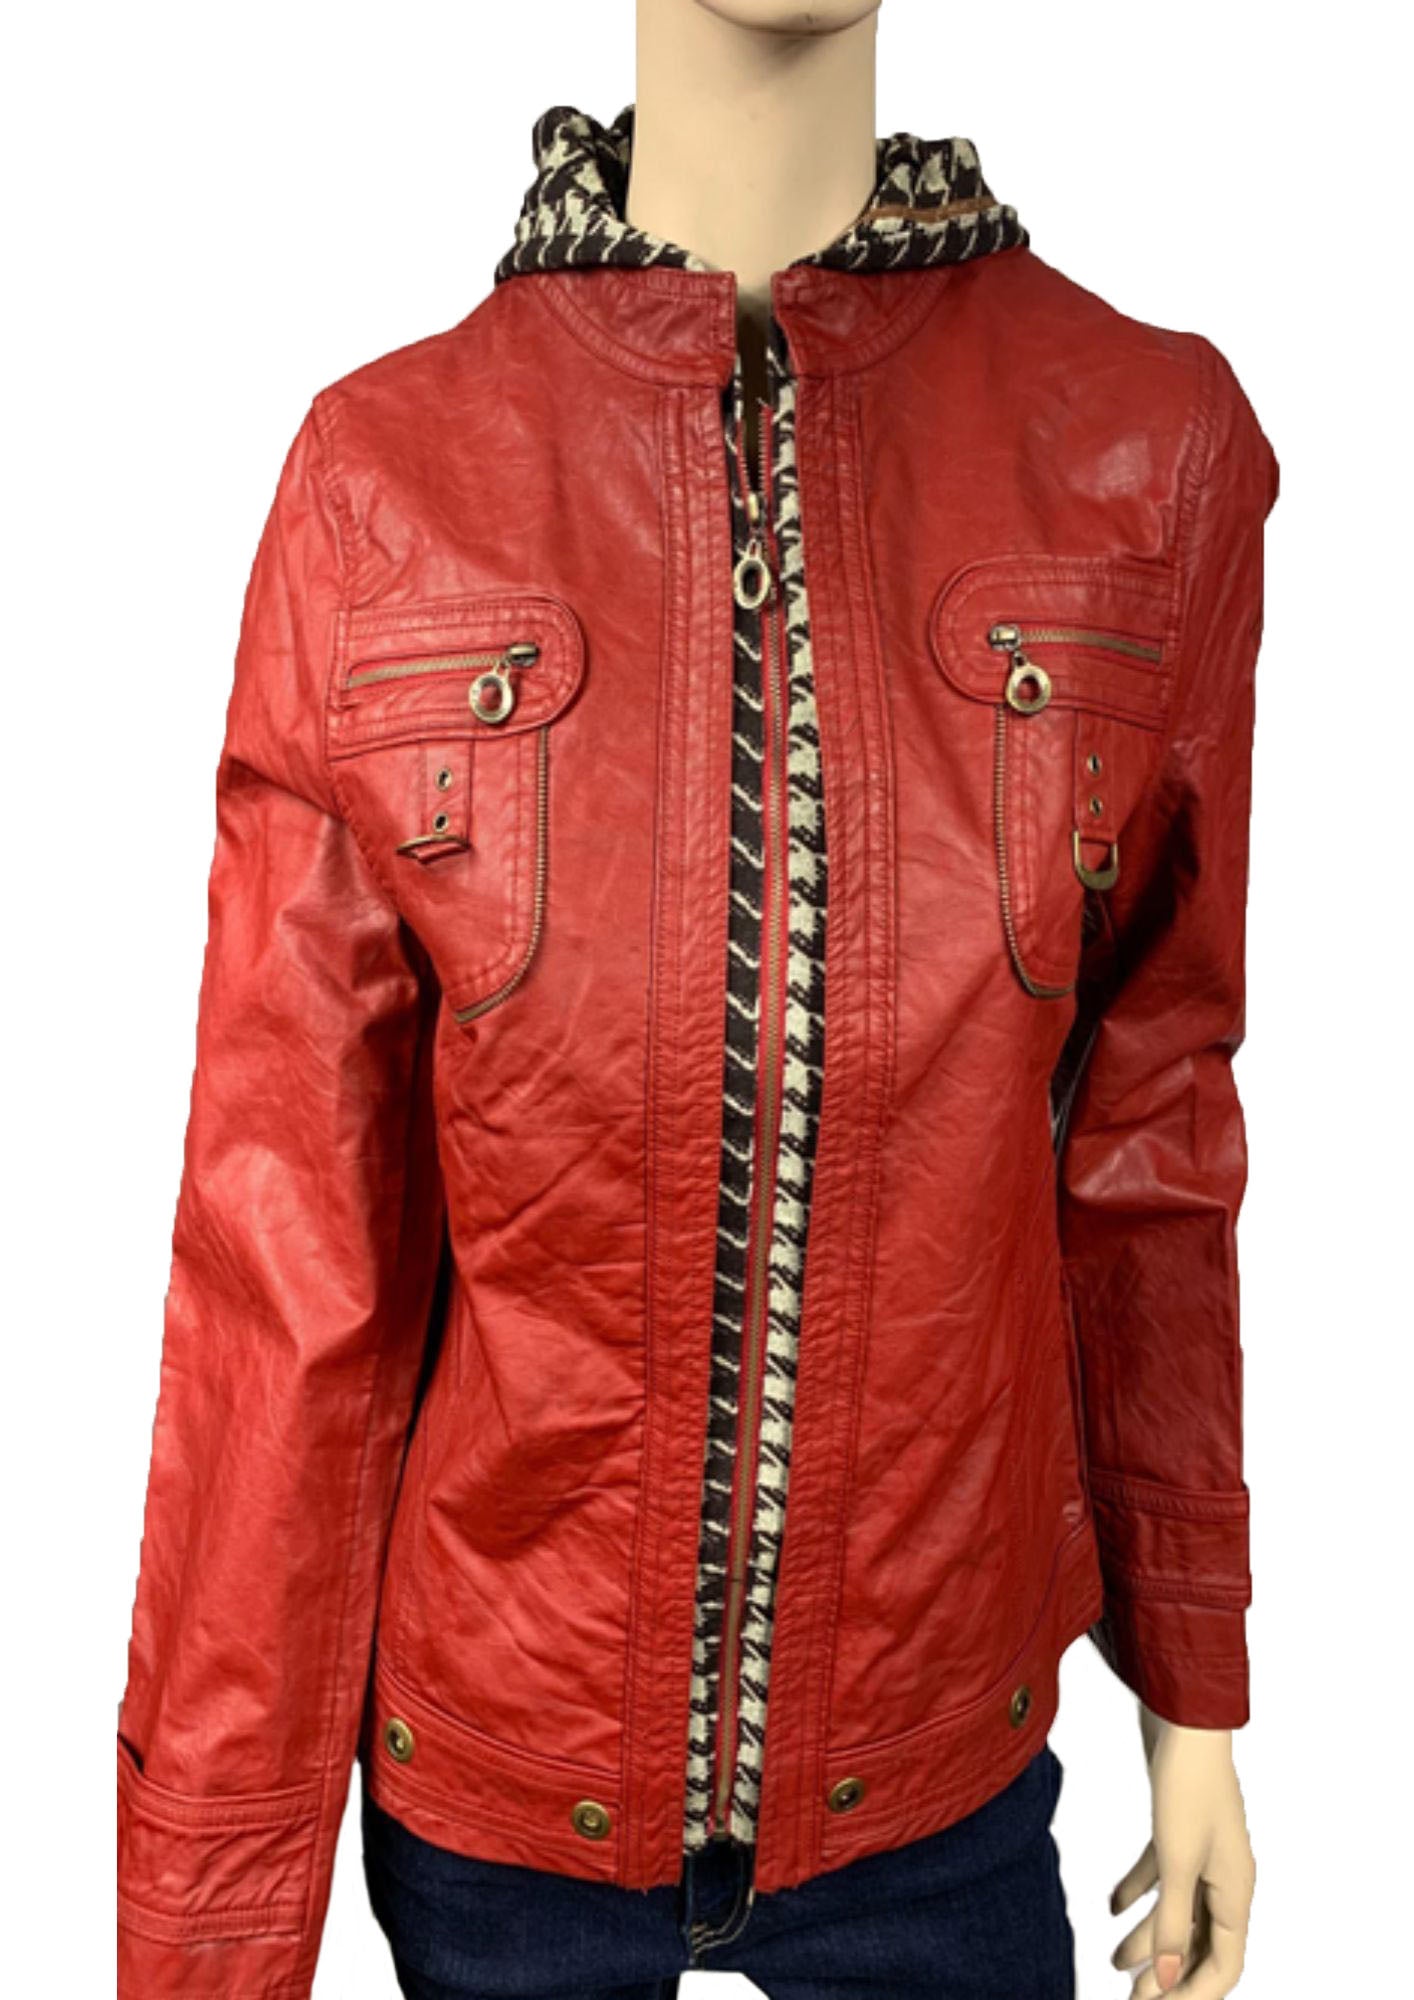 Women's Red Leather Jackets